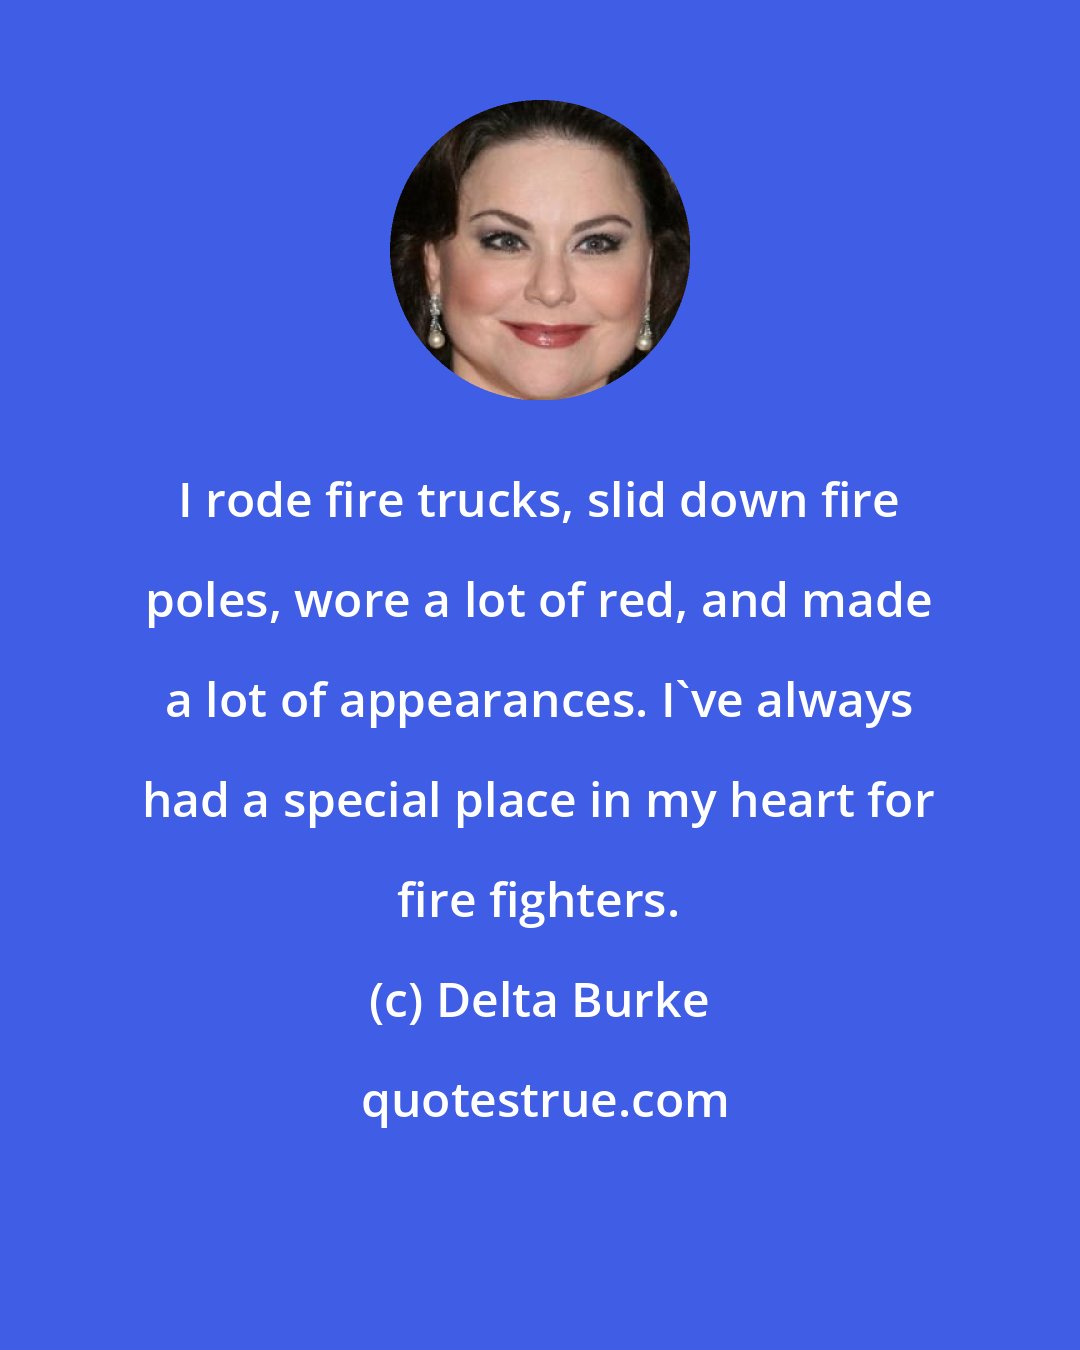 Delta Burke: I rode fire trucks, slid down fire poles, wore a lot of red, and made a lot of appearances. I've always had a special place in my heart for fire fighters.